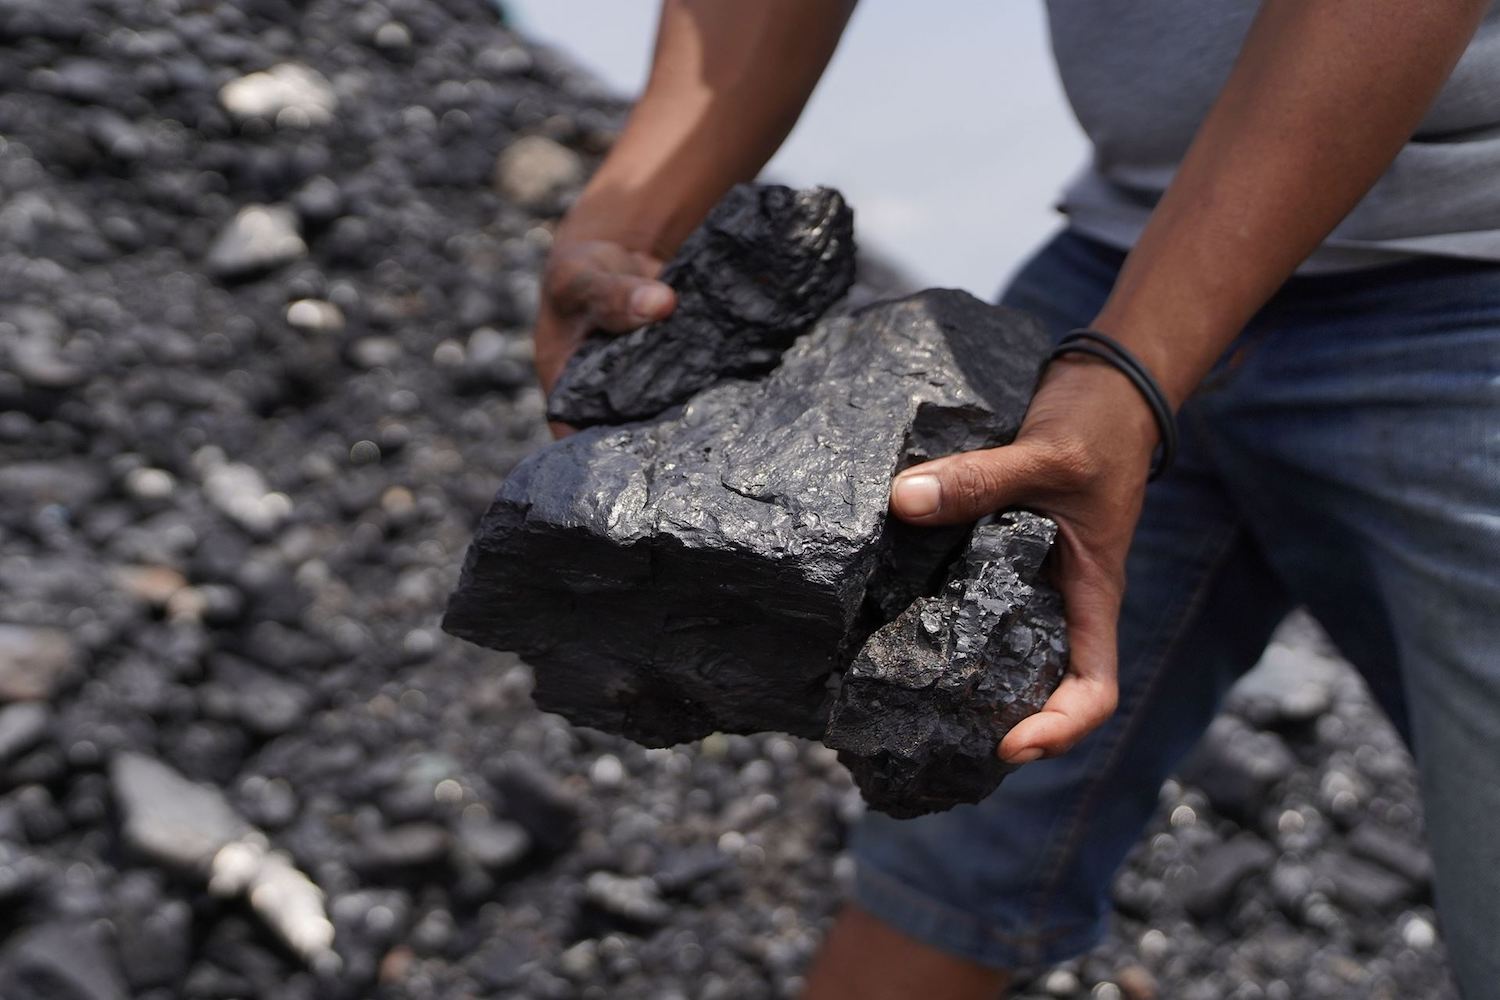 India plans to import coking coal from Russia